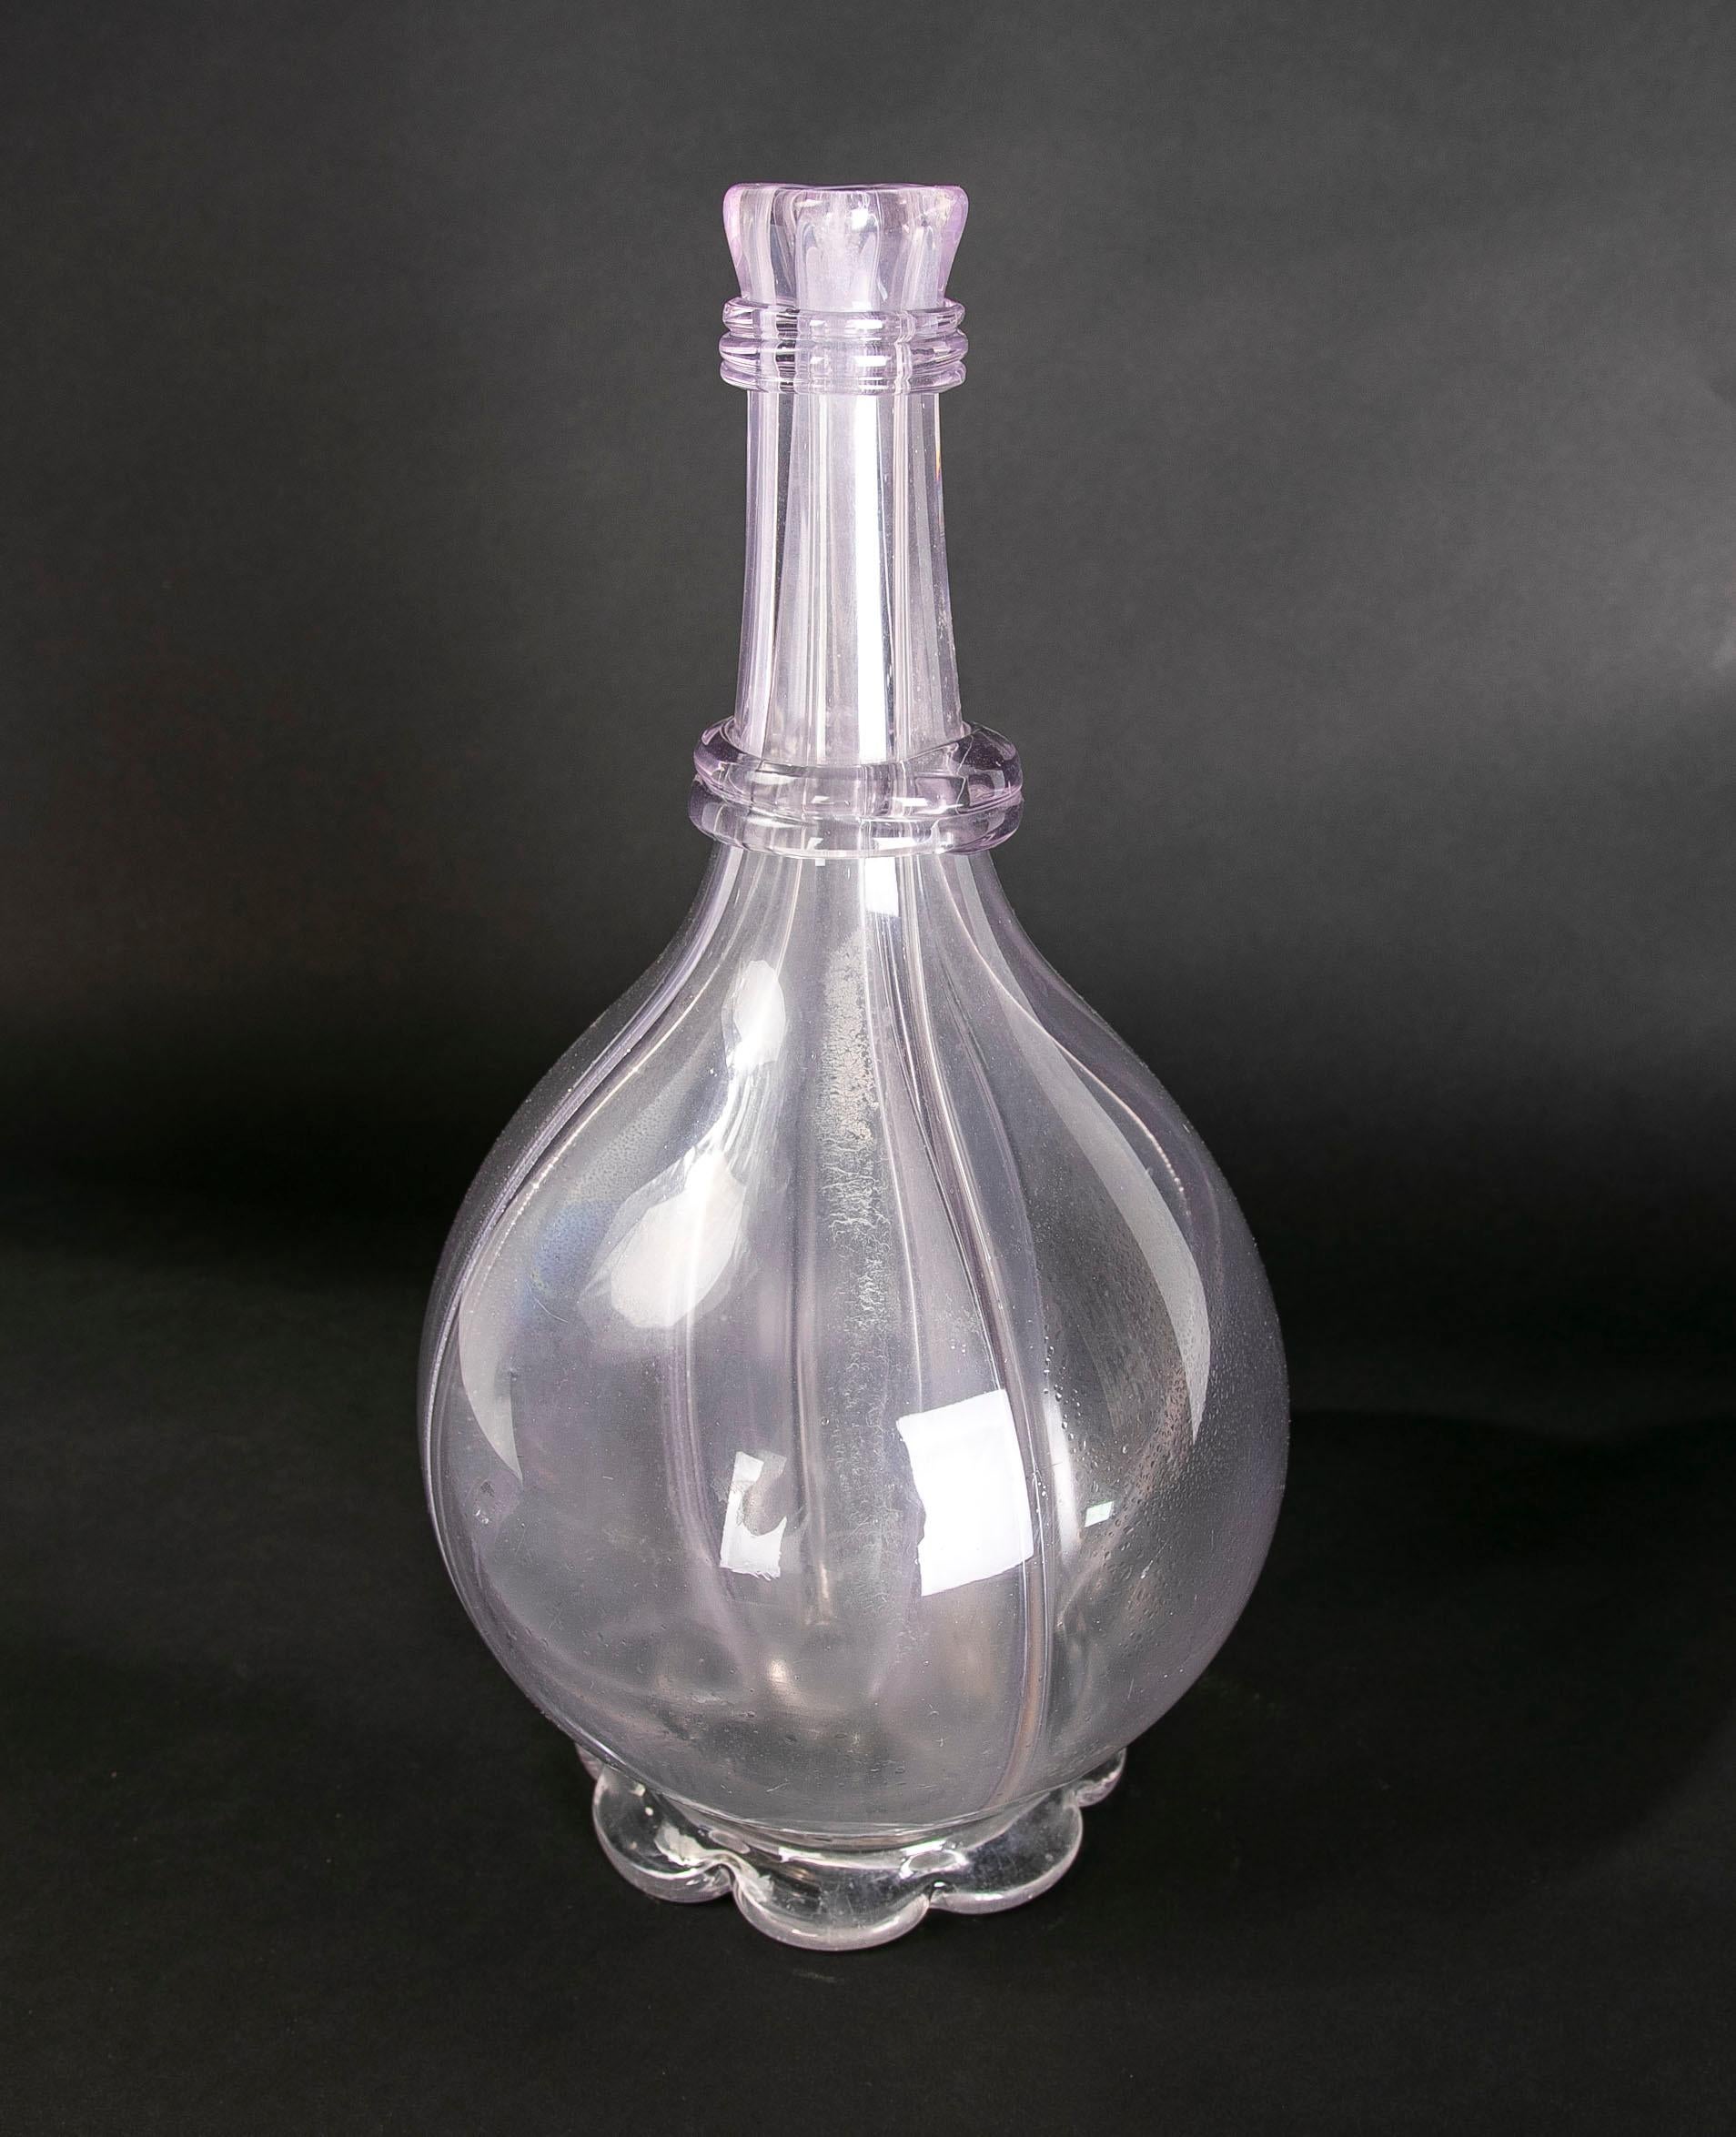 Rounded Crystal Vase with Rounded Bottom and Flower Shaped Base.